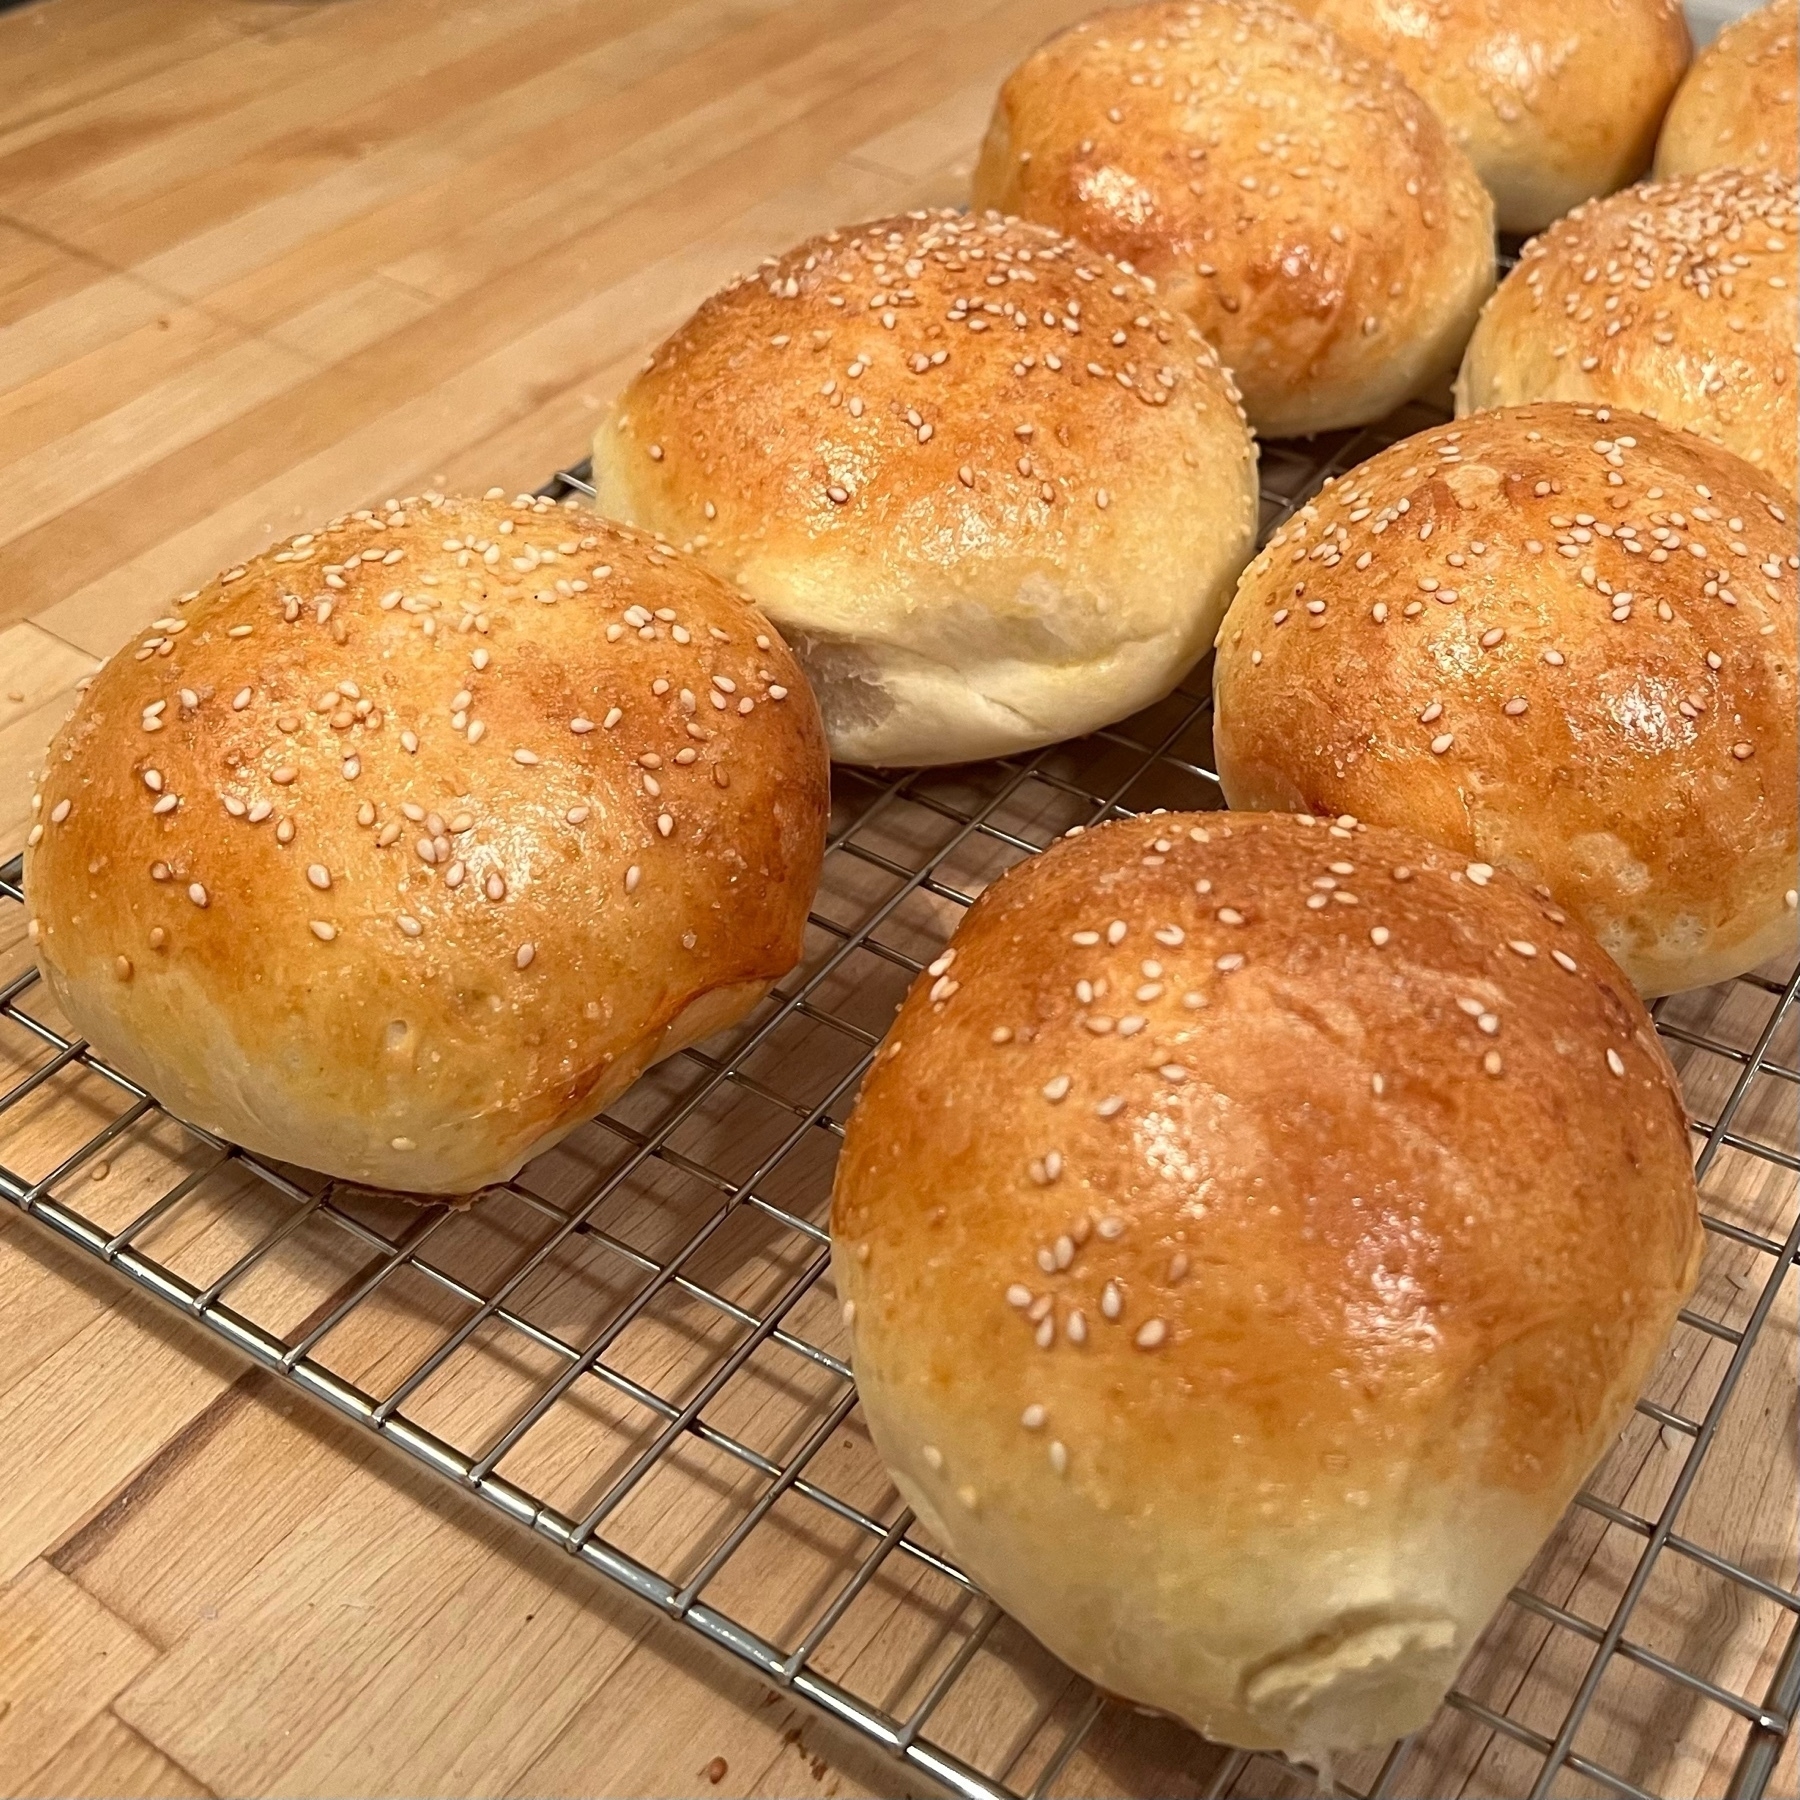 fresh baked hamburger bubs, browned with a sheen from egg wash, topped with sesame seeds